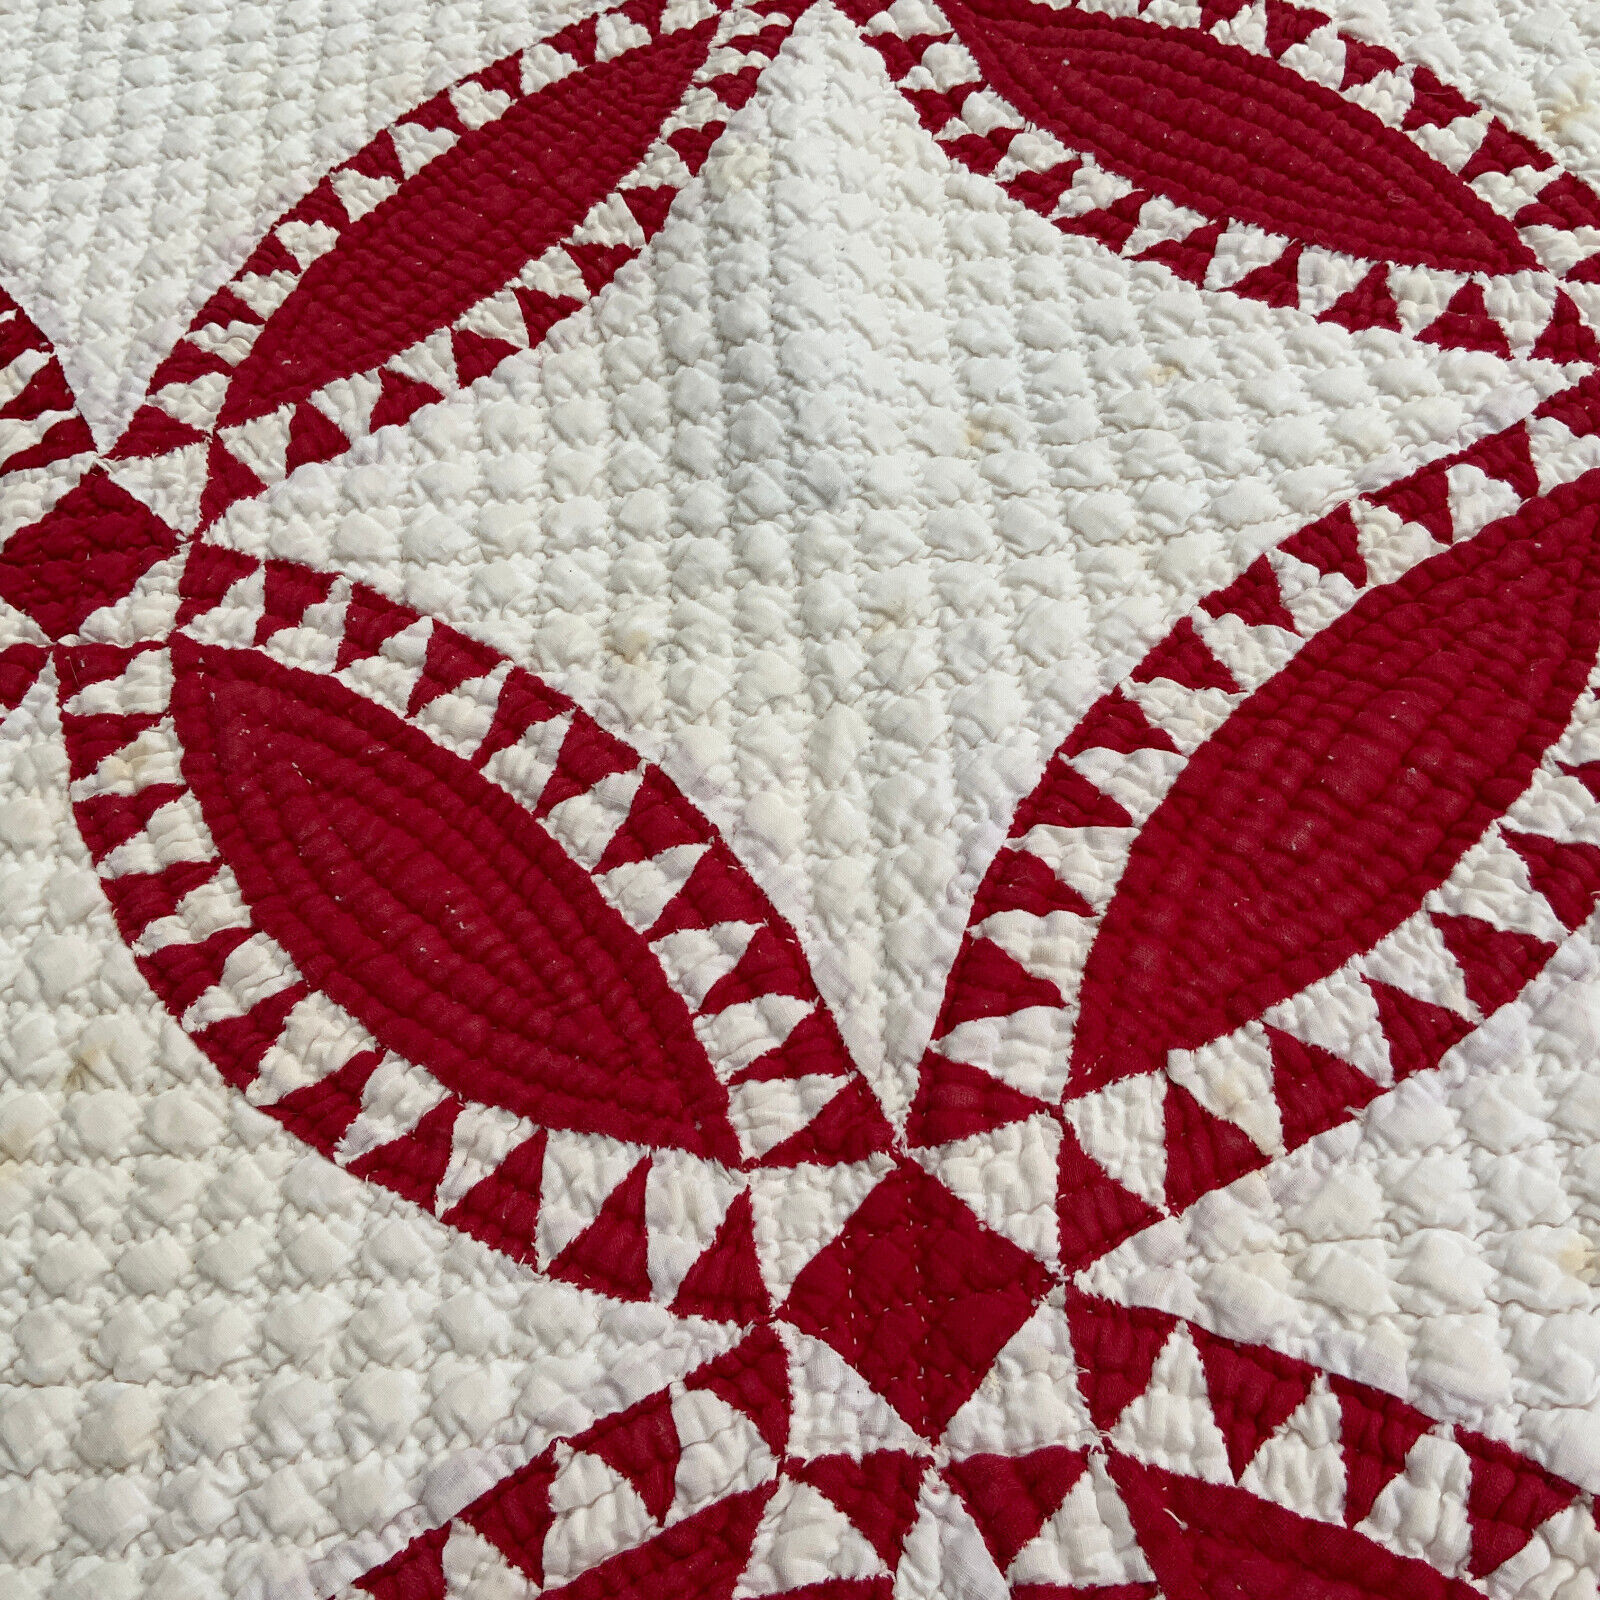 Old Red & White Handmade Quilt with Provenence